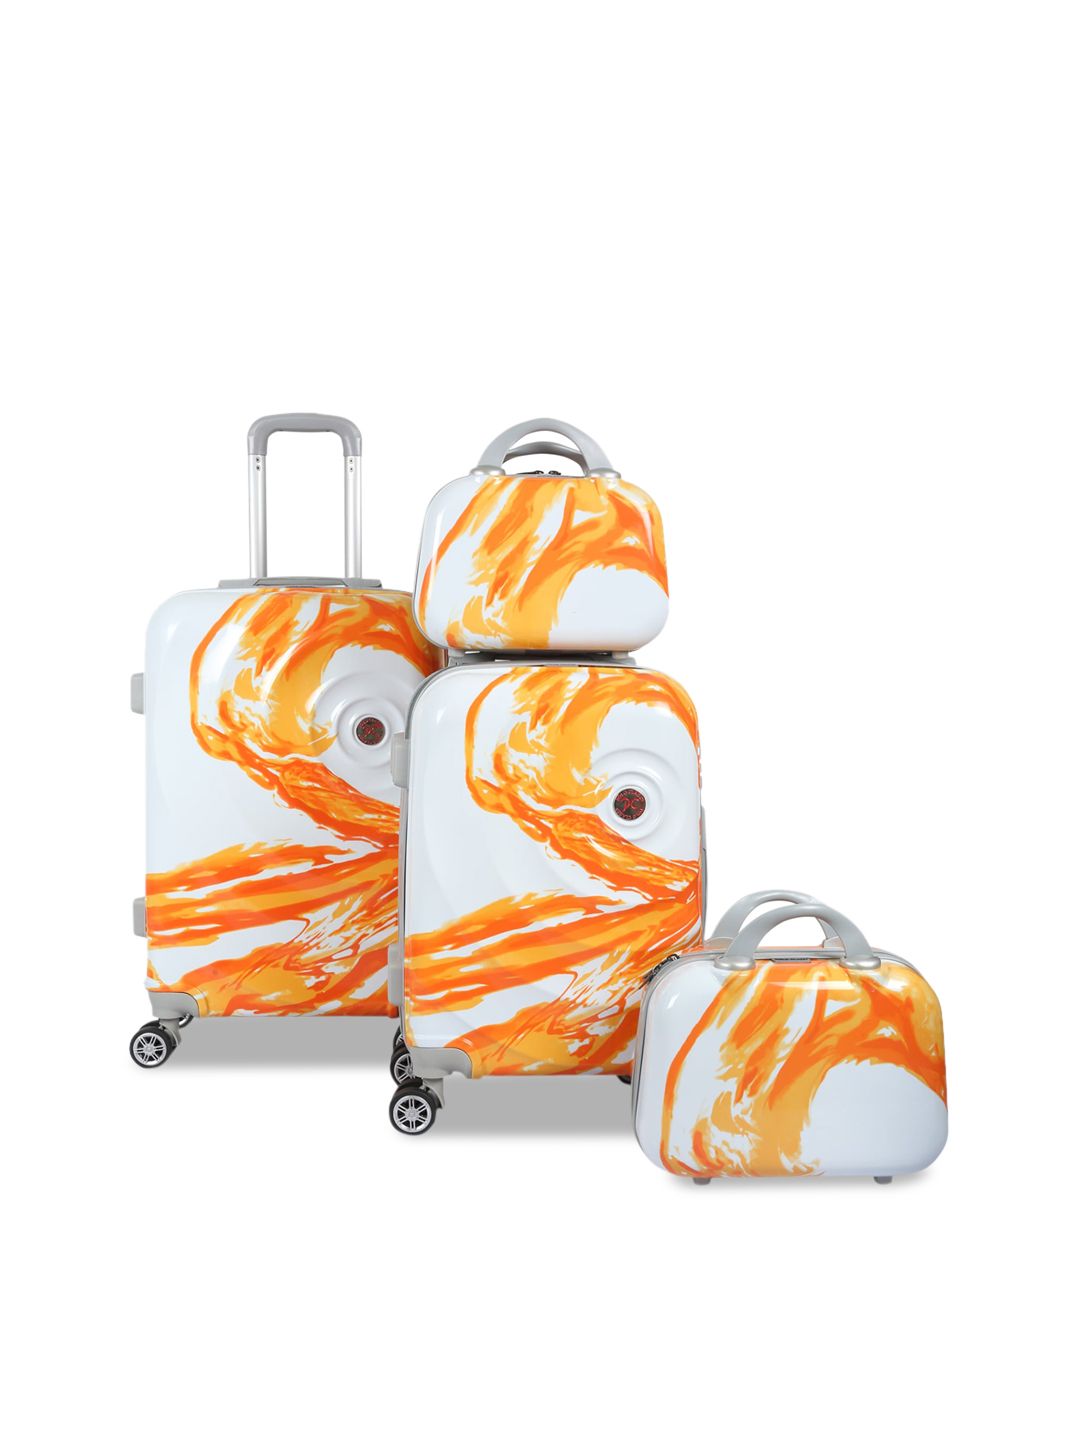 Polo Class Unisex Set Of 4 Orange & White Printed Trolley & Vanity Bags Price in India